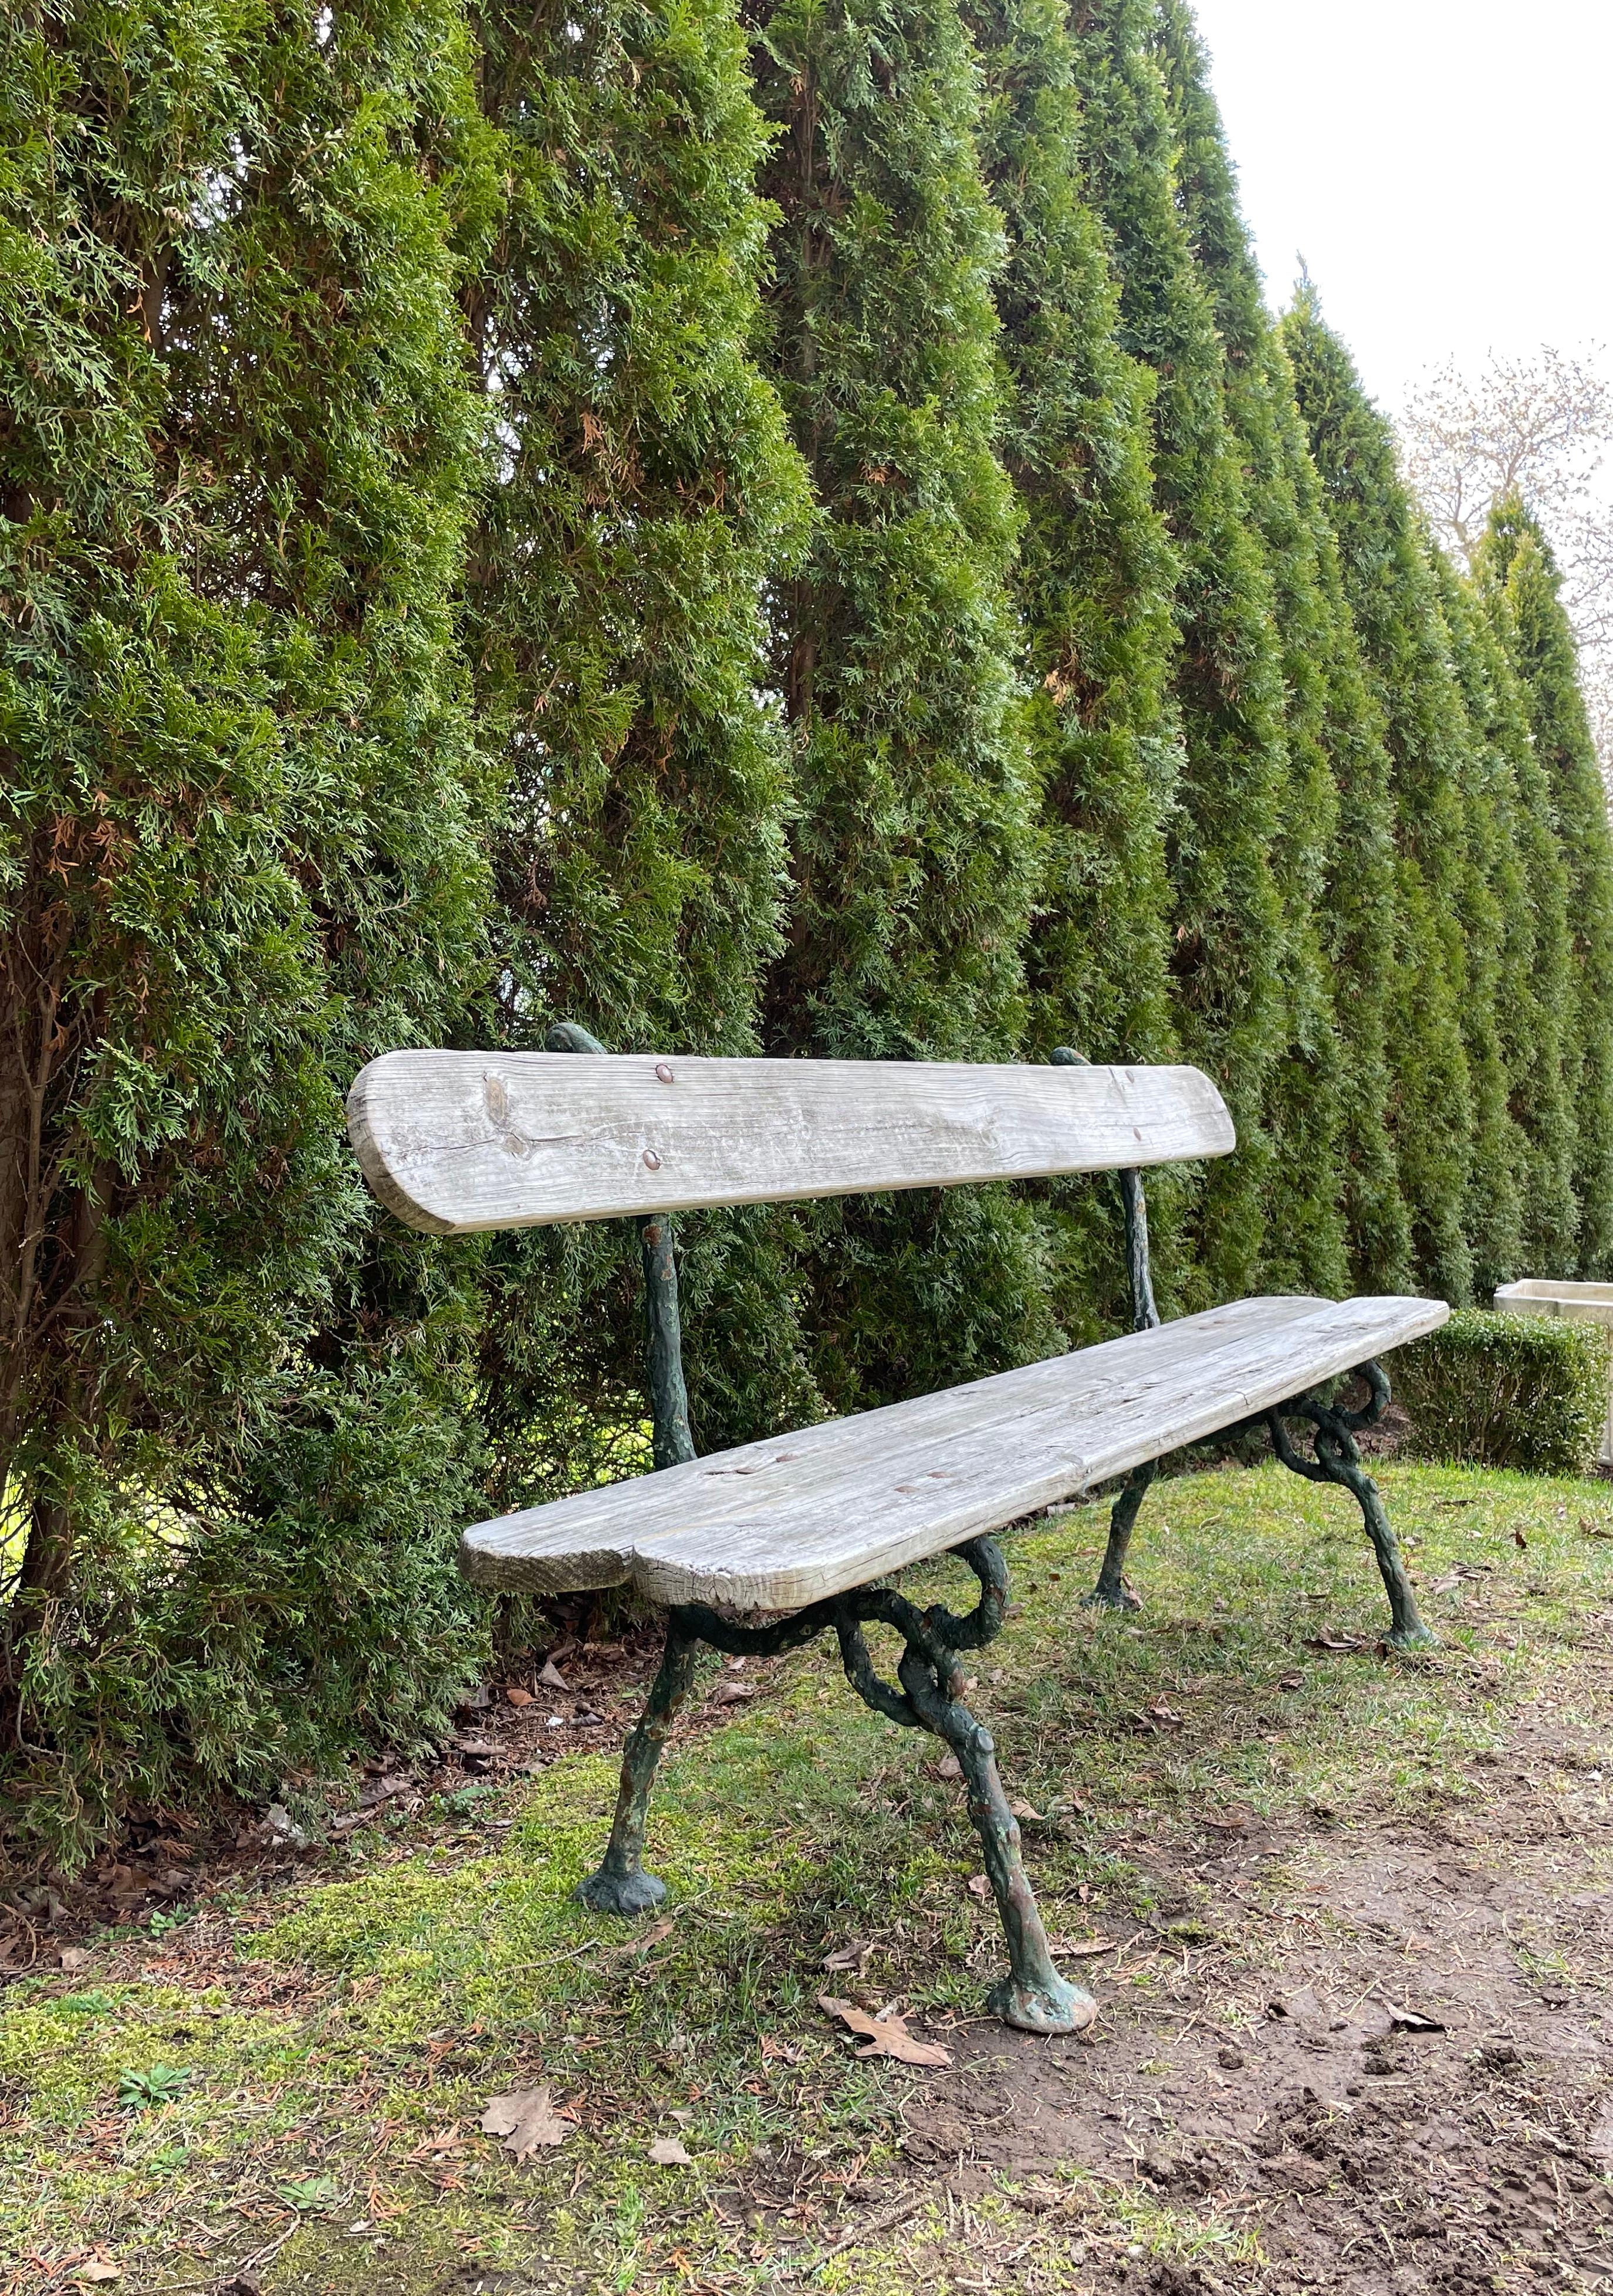 Faux Bois garden benches made of cement are more typically found in France, but we are most fortunate to have been able to source this wonderful one in cast iron. In excellent antique condition, the bench dates from the 1870s-1880s but we believe